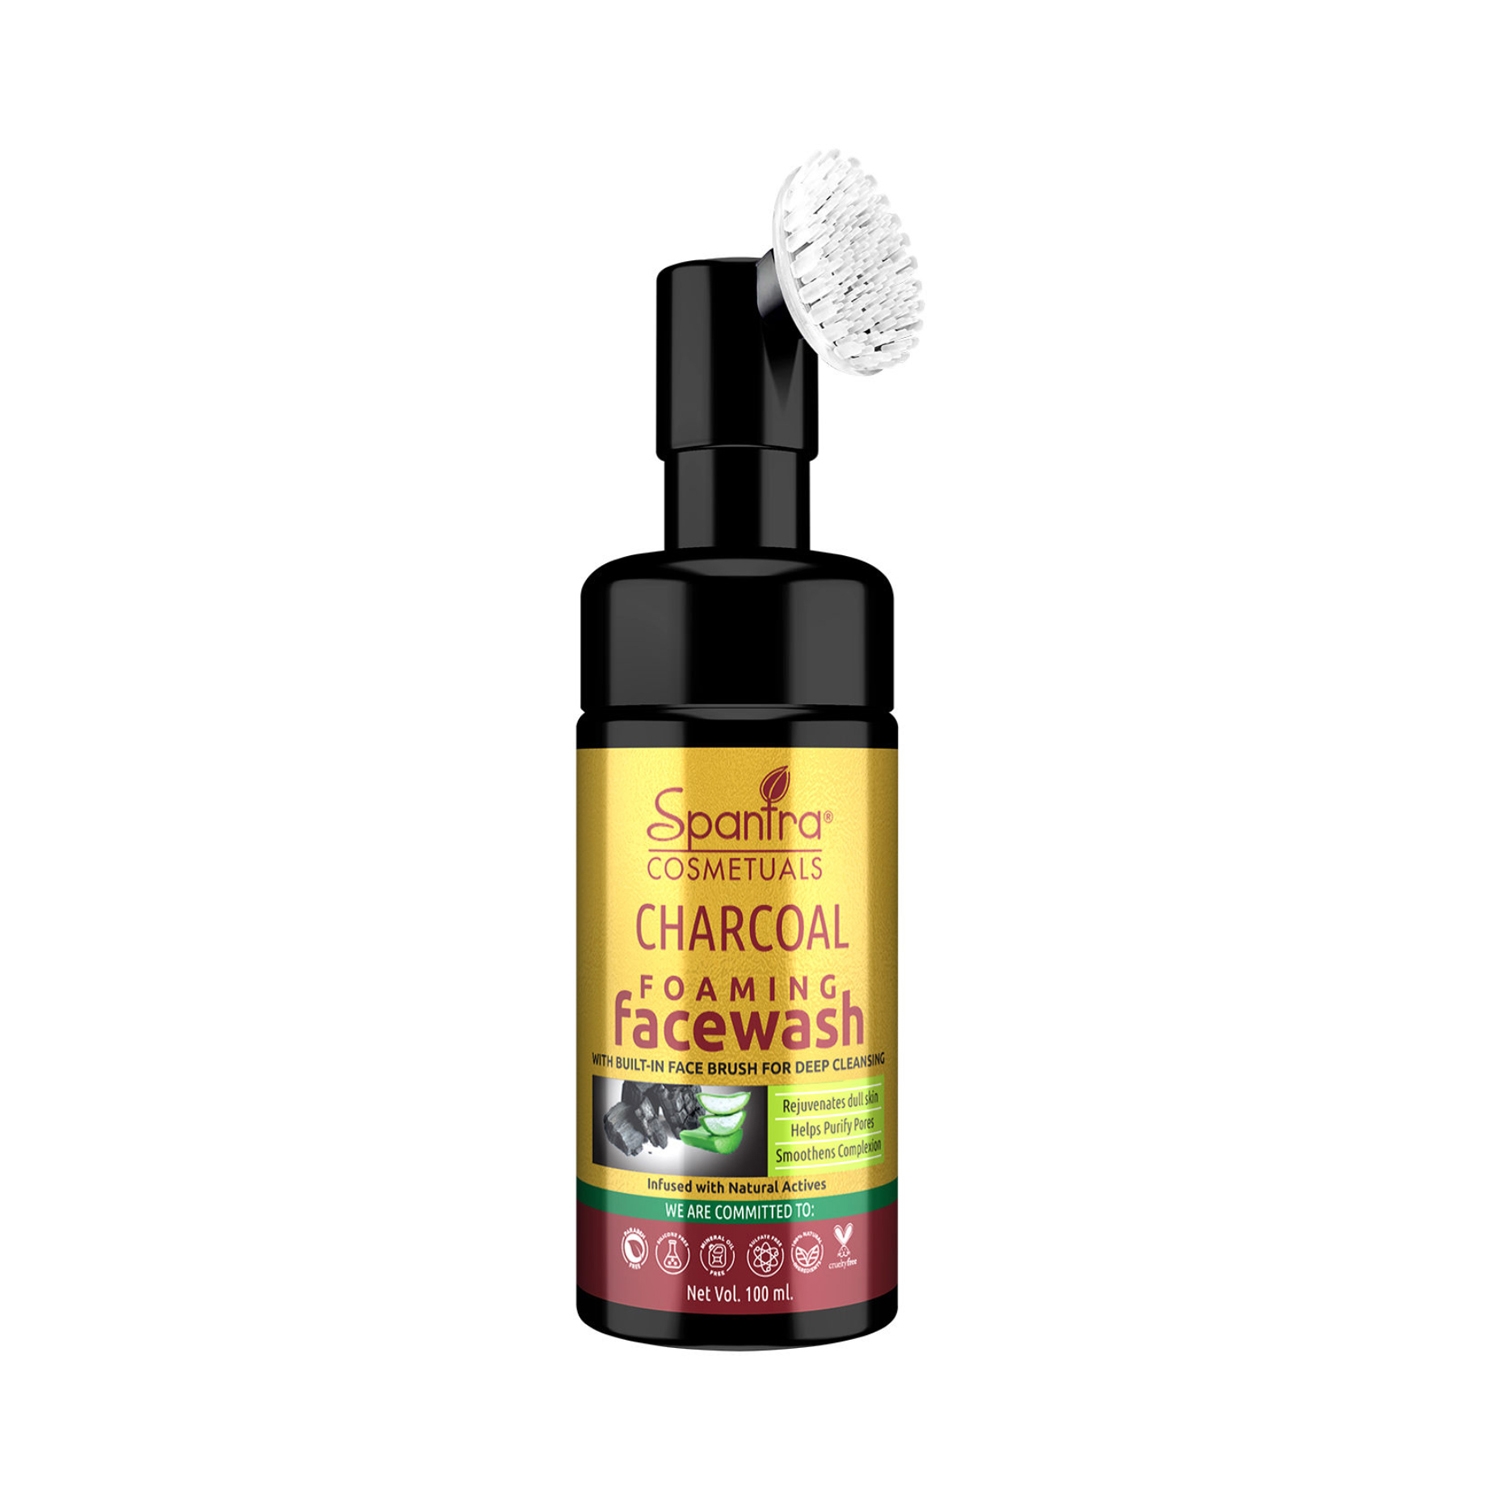 Spantra Charcoal Foaming Face Wash (100ml)